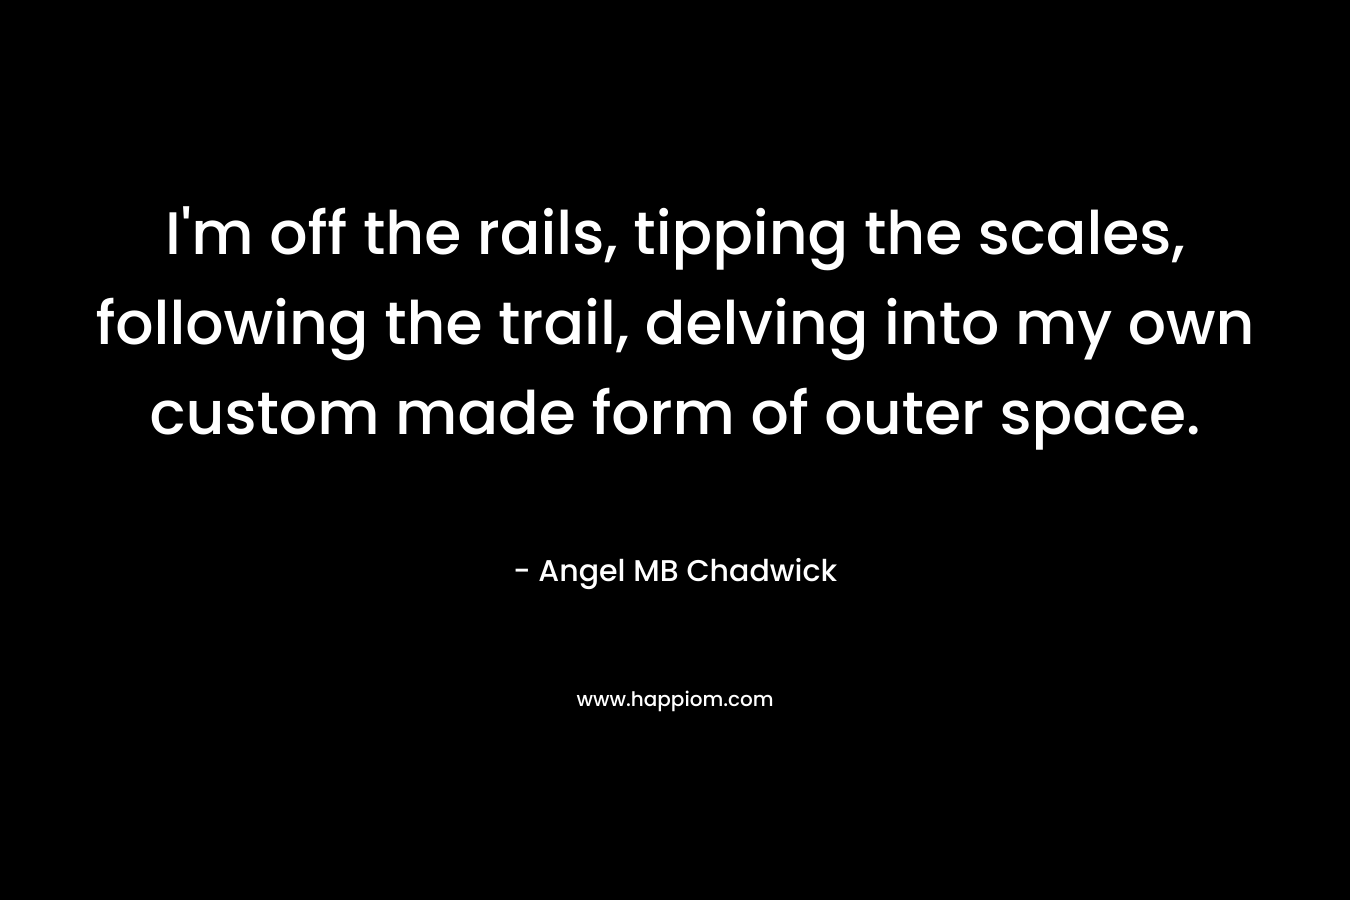 I’m off the rails, tipping the scales, following the trail, delving into my own custom made form of outer space. – Angel MB Chadwick